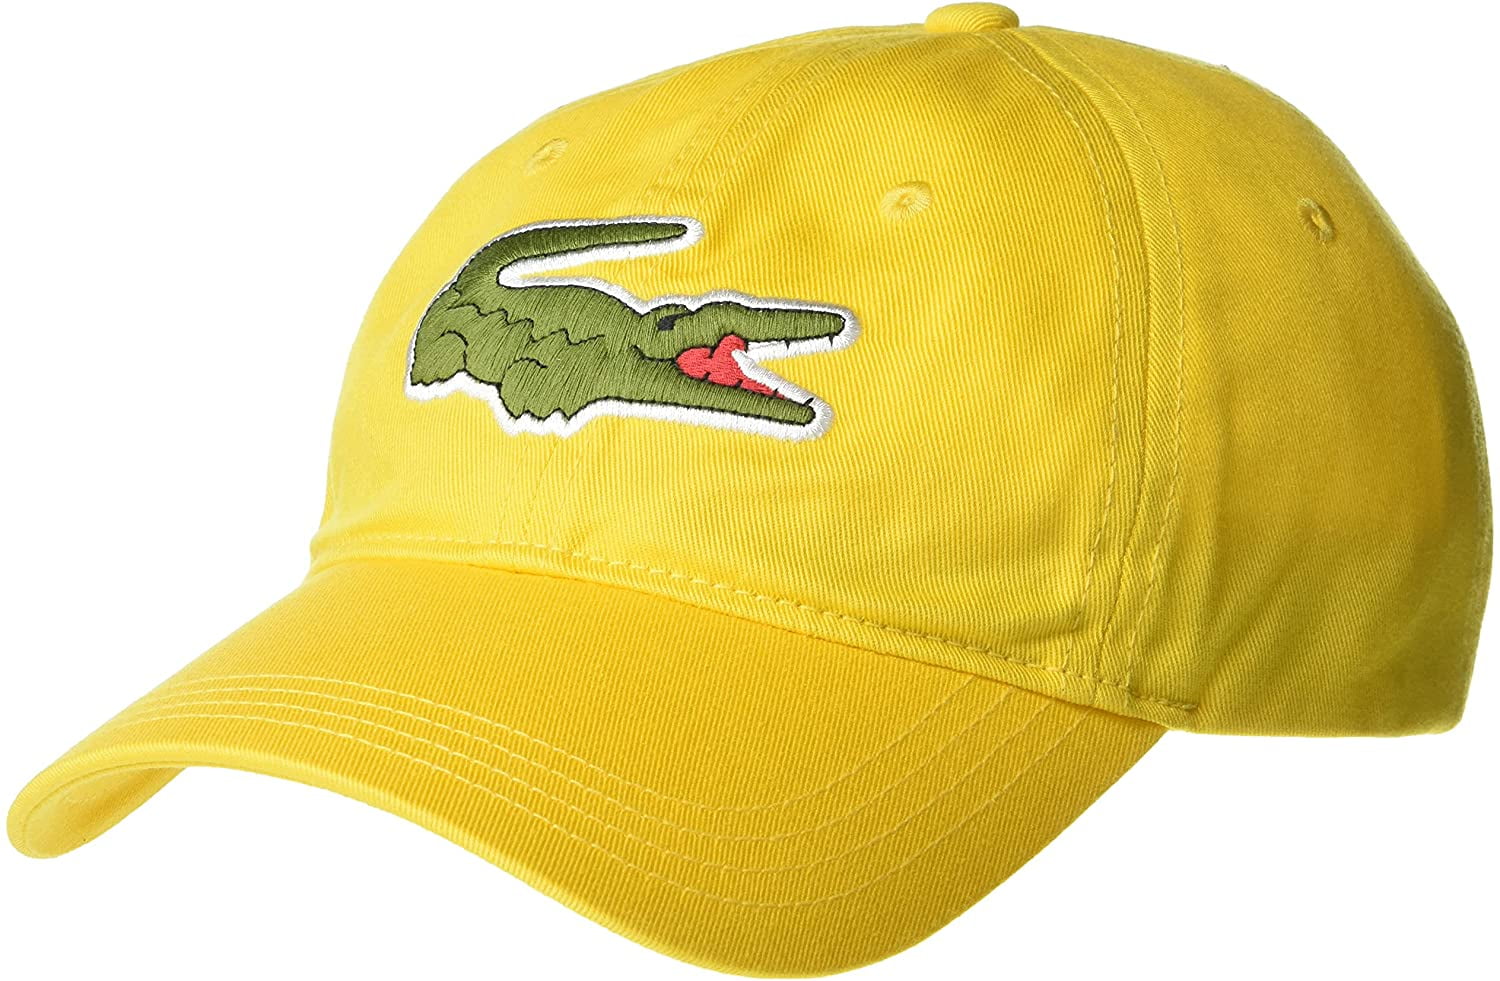 Mens Hat Cornmeal Leather Strap One Big Yellow Croc Twill Size Lacoste Adjustable